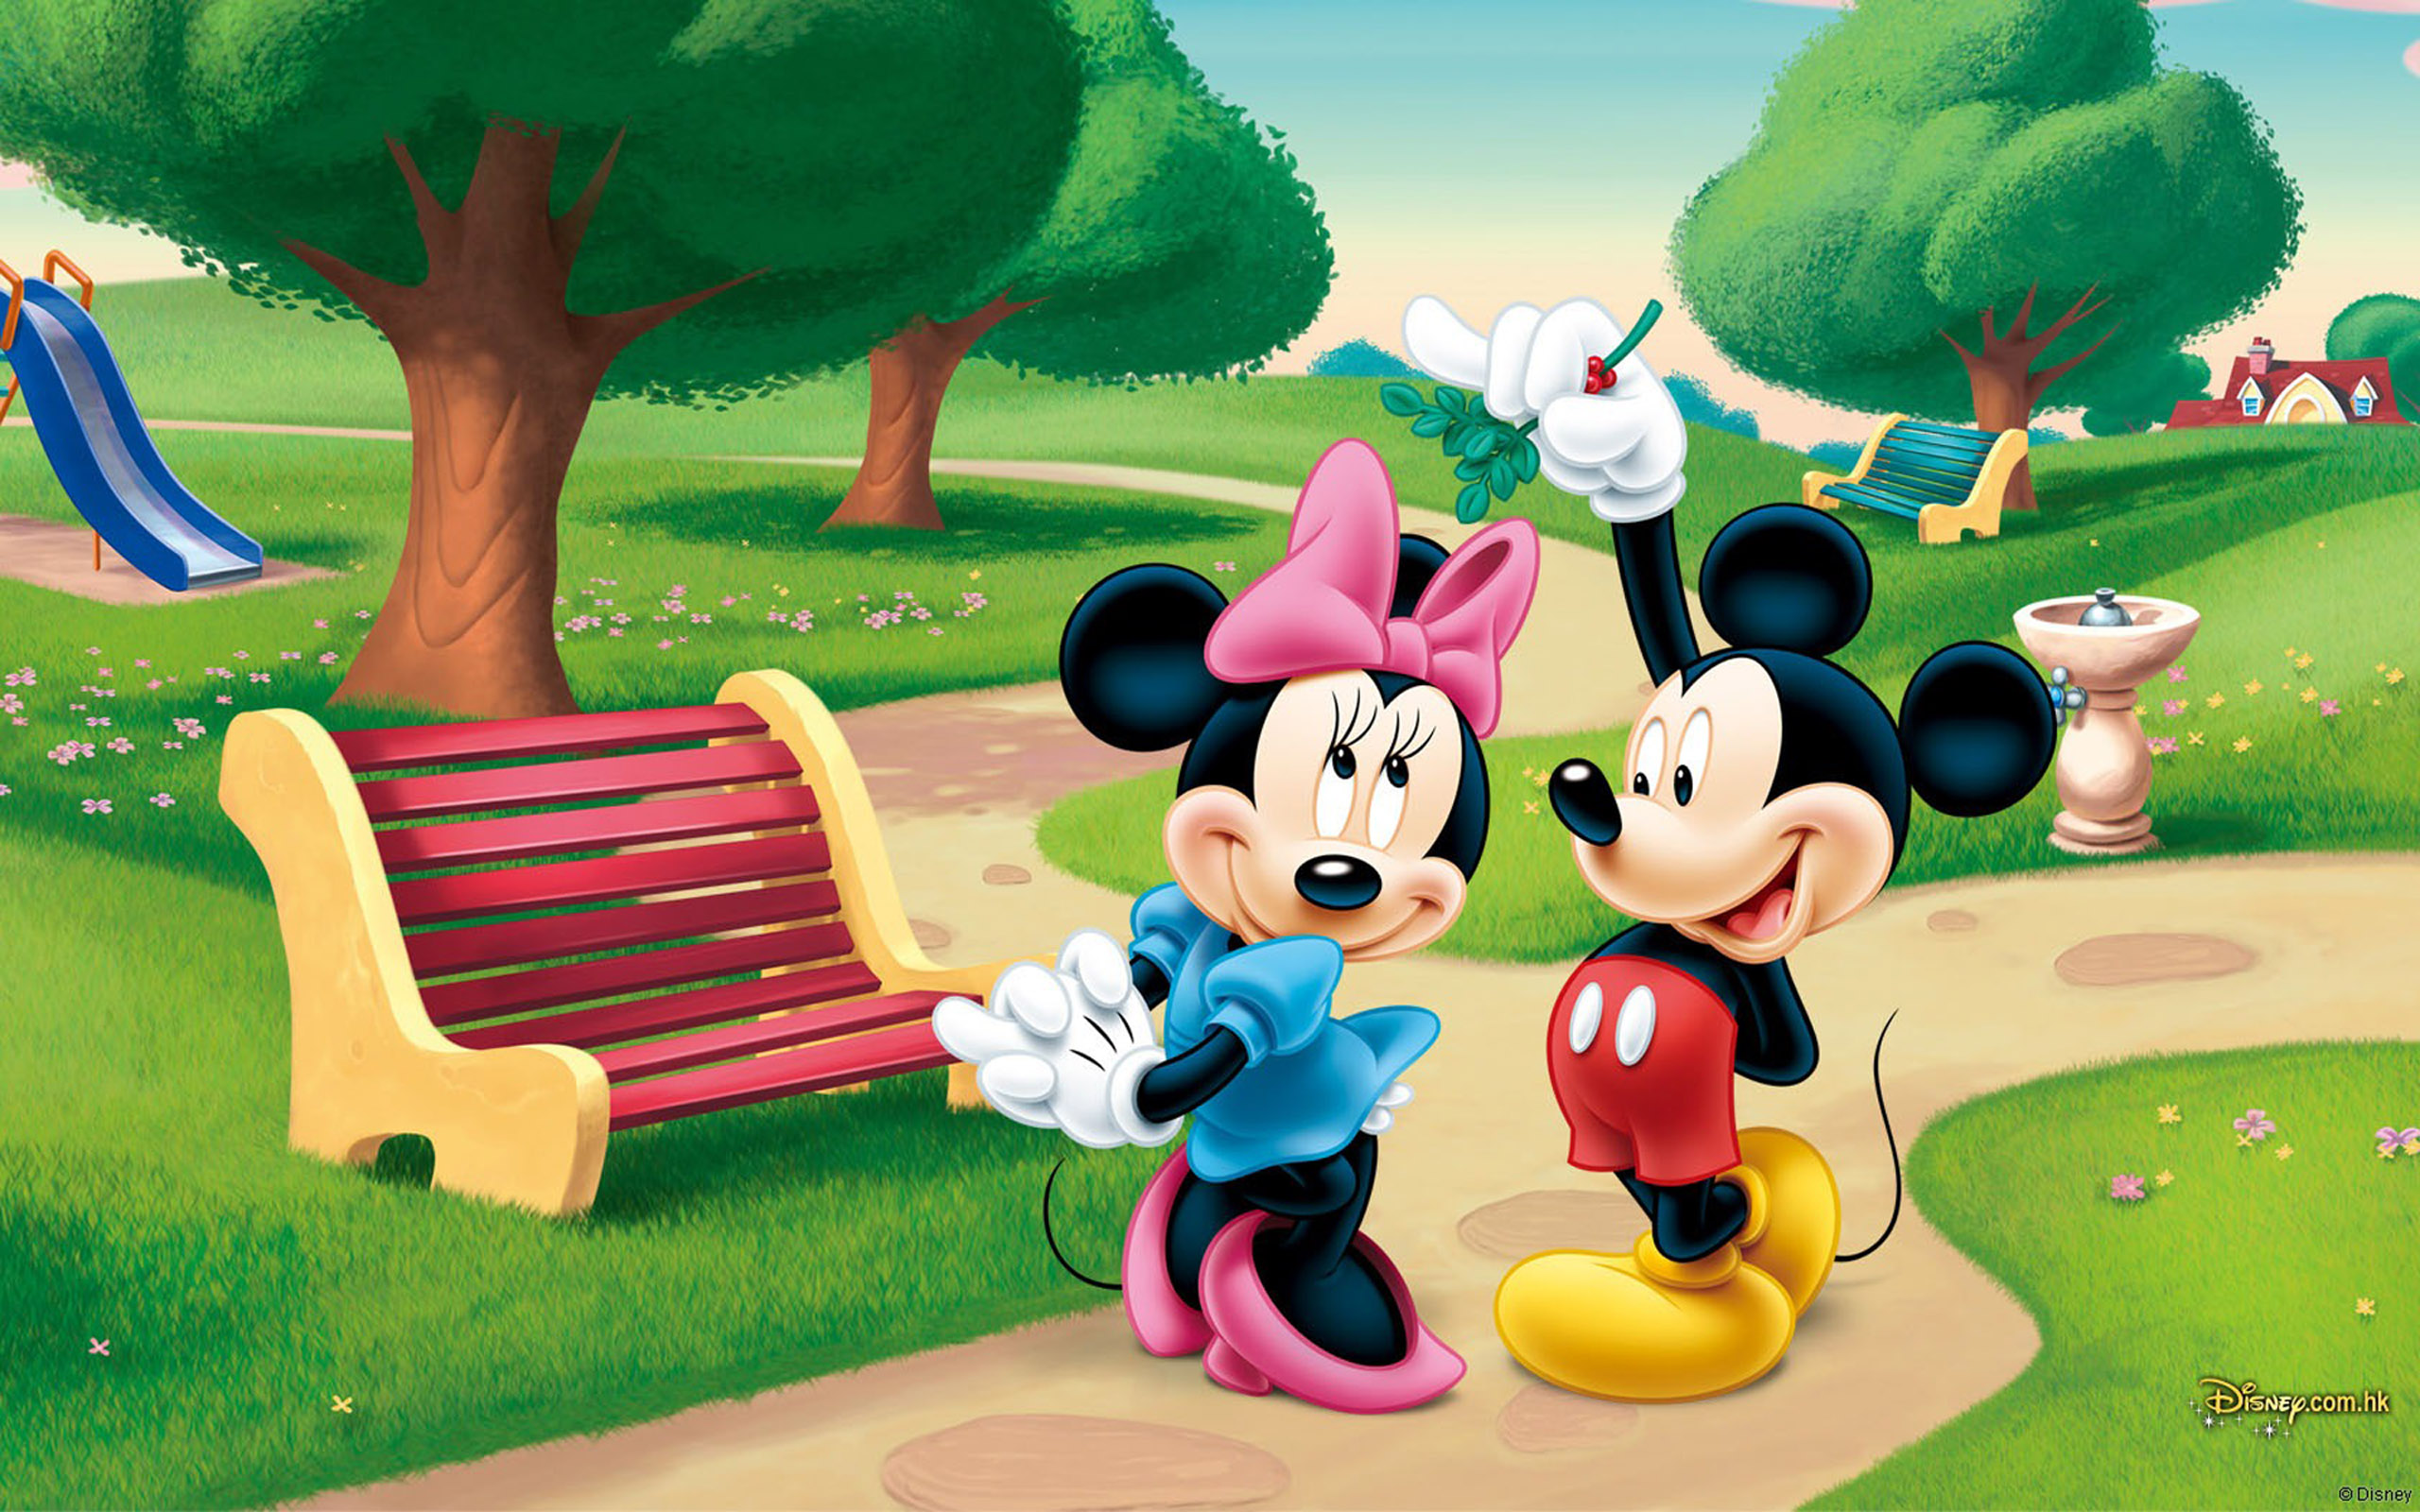 Mickey Mouse And Minnie Mouse In The Park Desktop Wallpaper HD, Wallpaper13.com